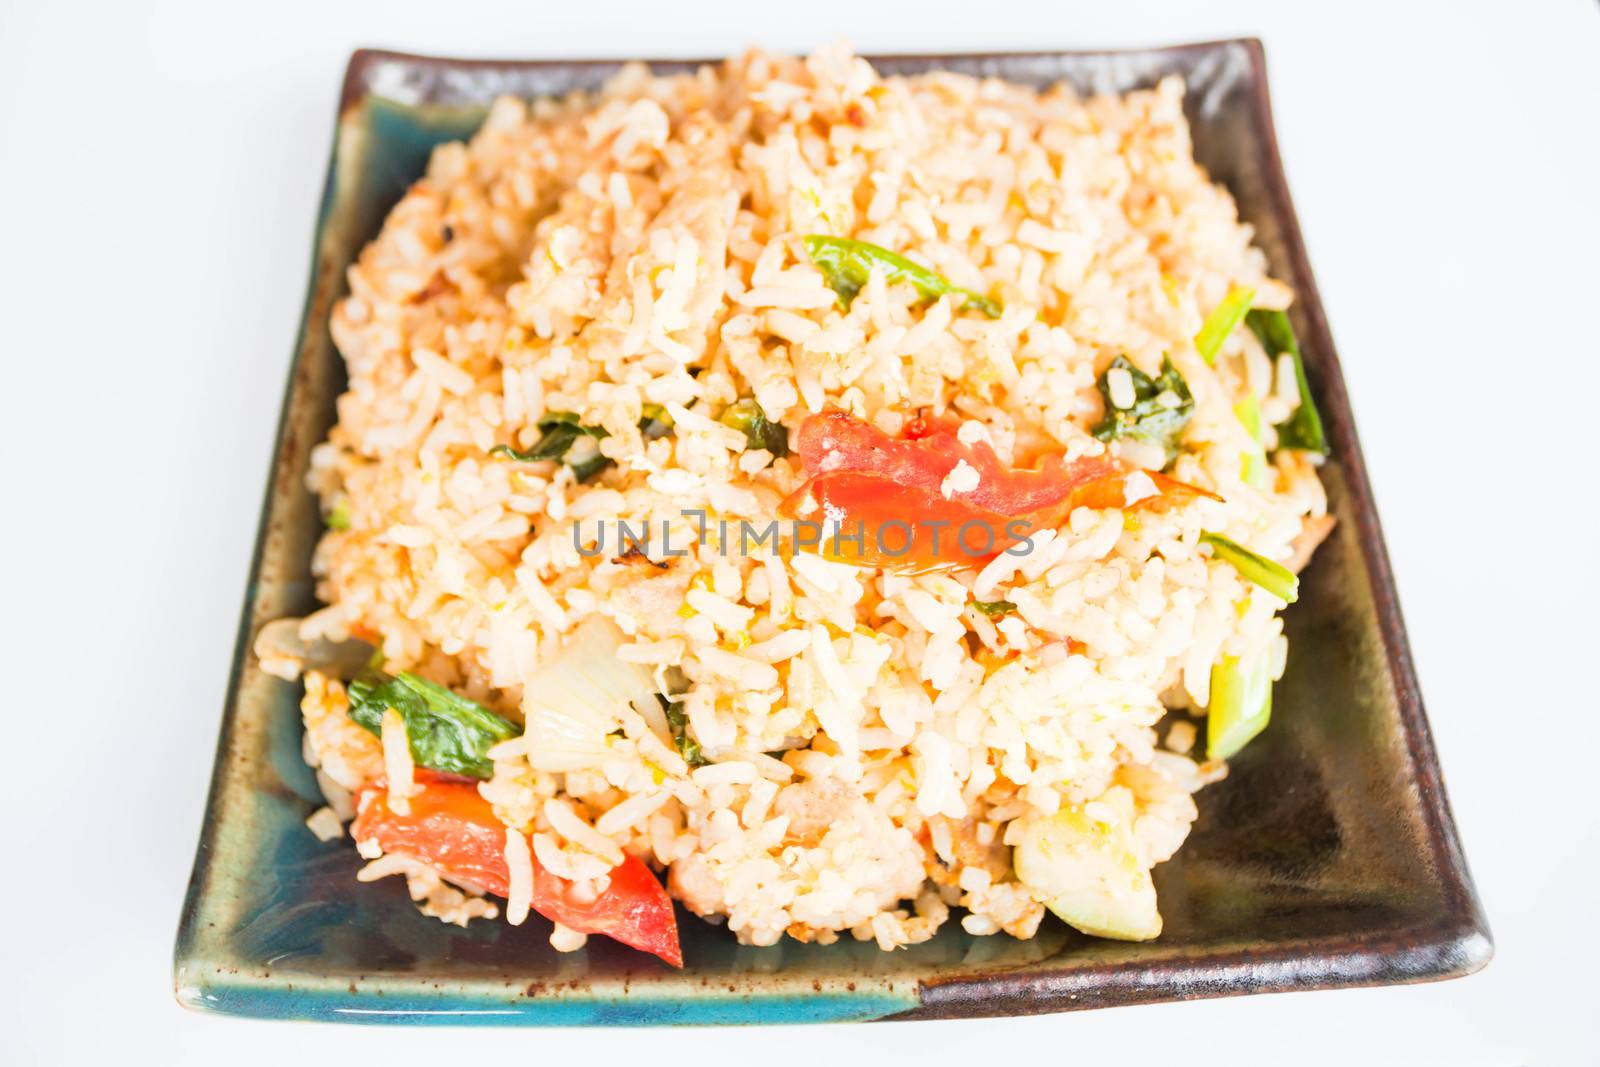 Fried rice with deep fried pork garlic and vegetable by punsayaporn